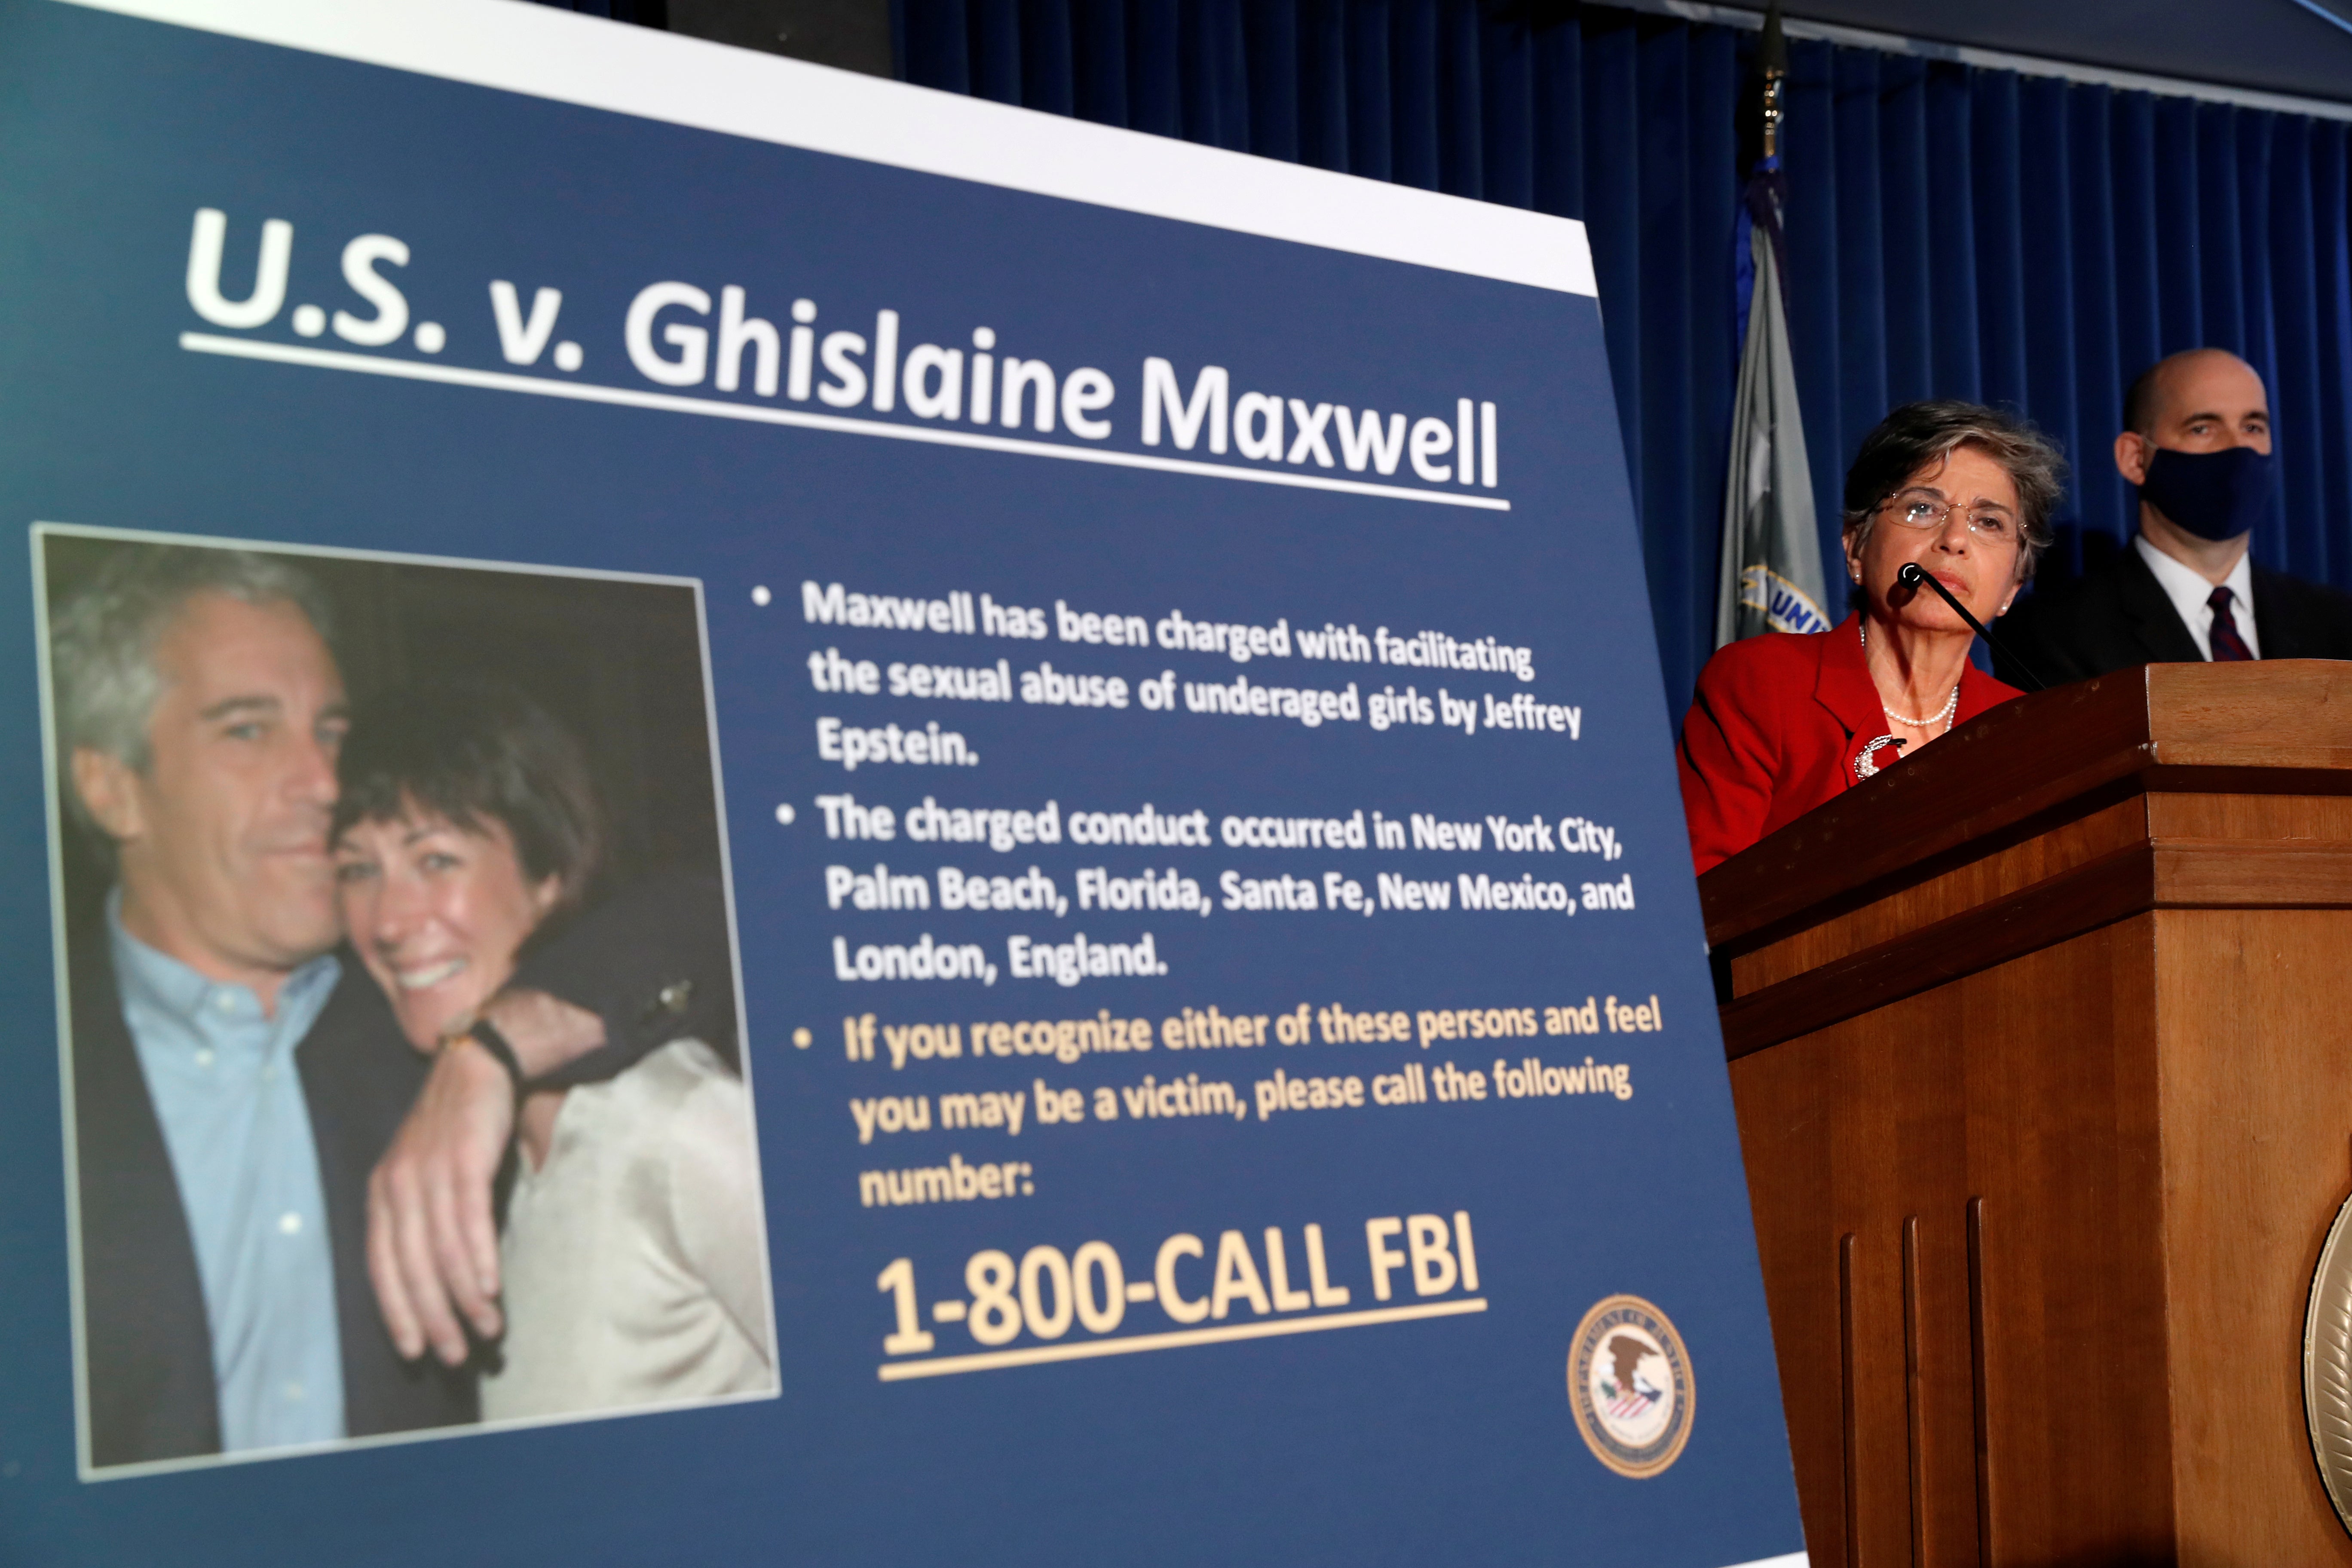 Ghislaine Maxwell: Appeals judges to decide on keeping documents secret